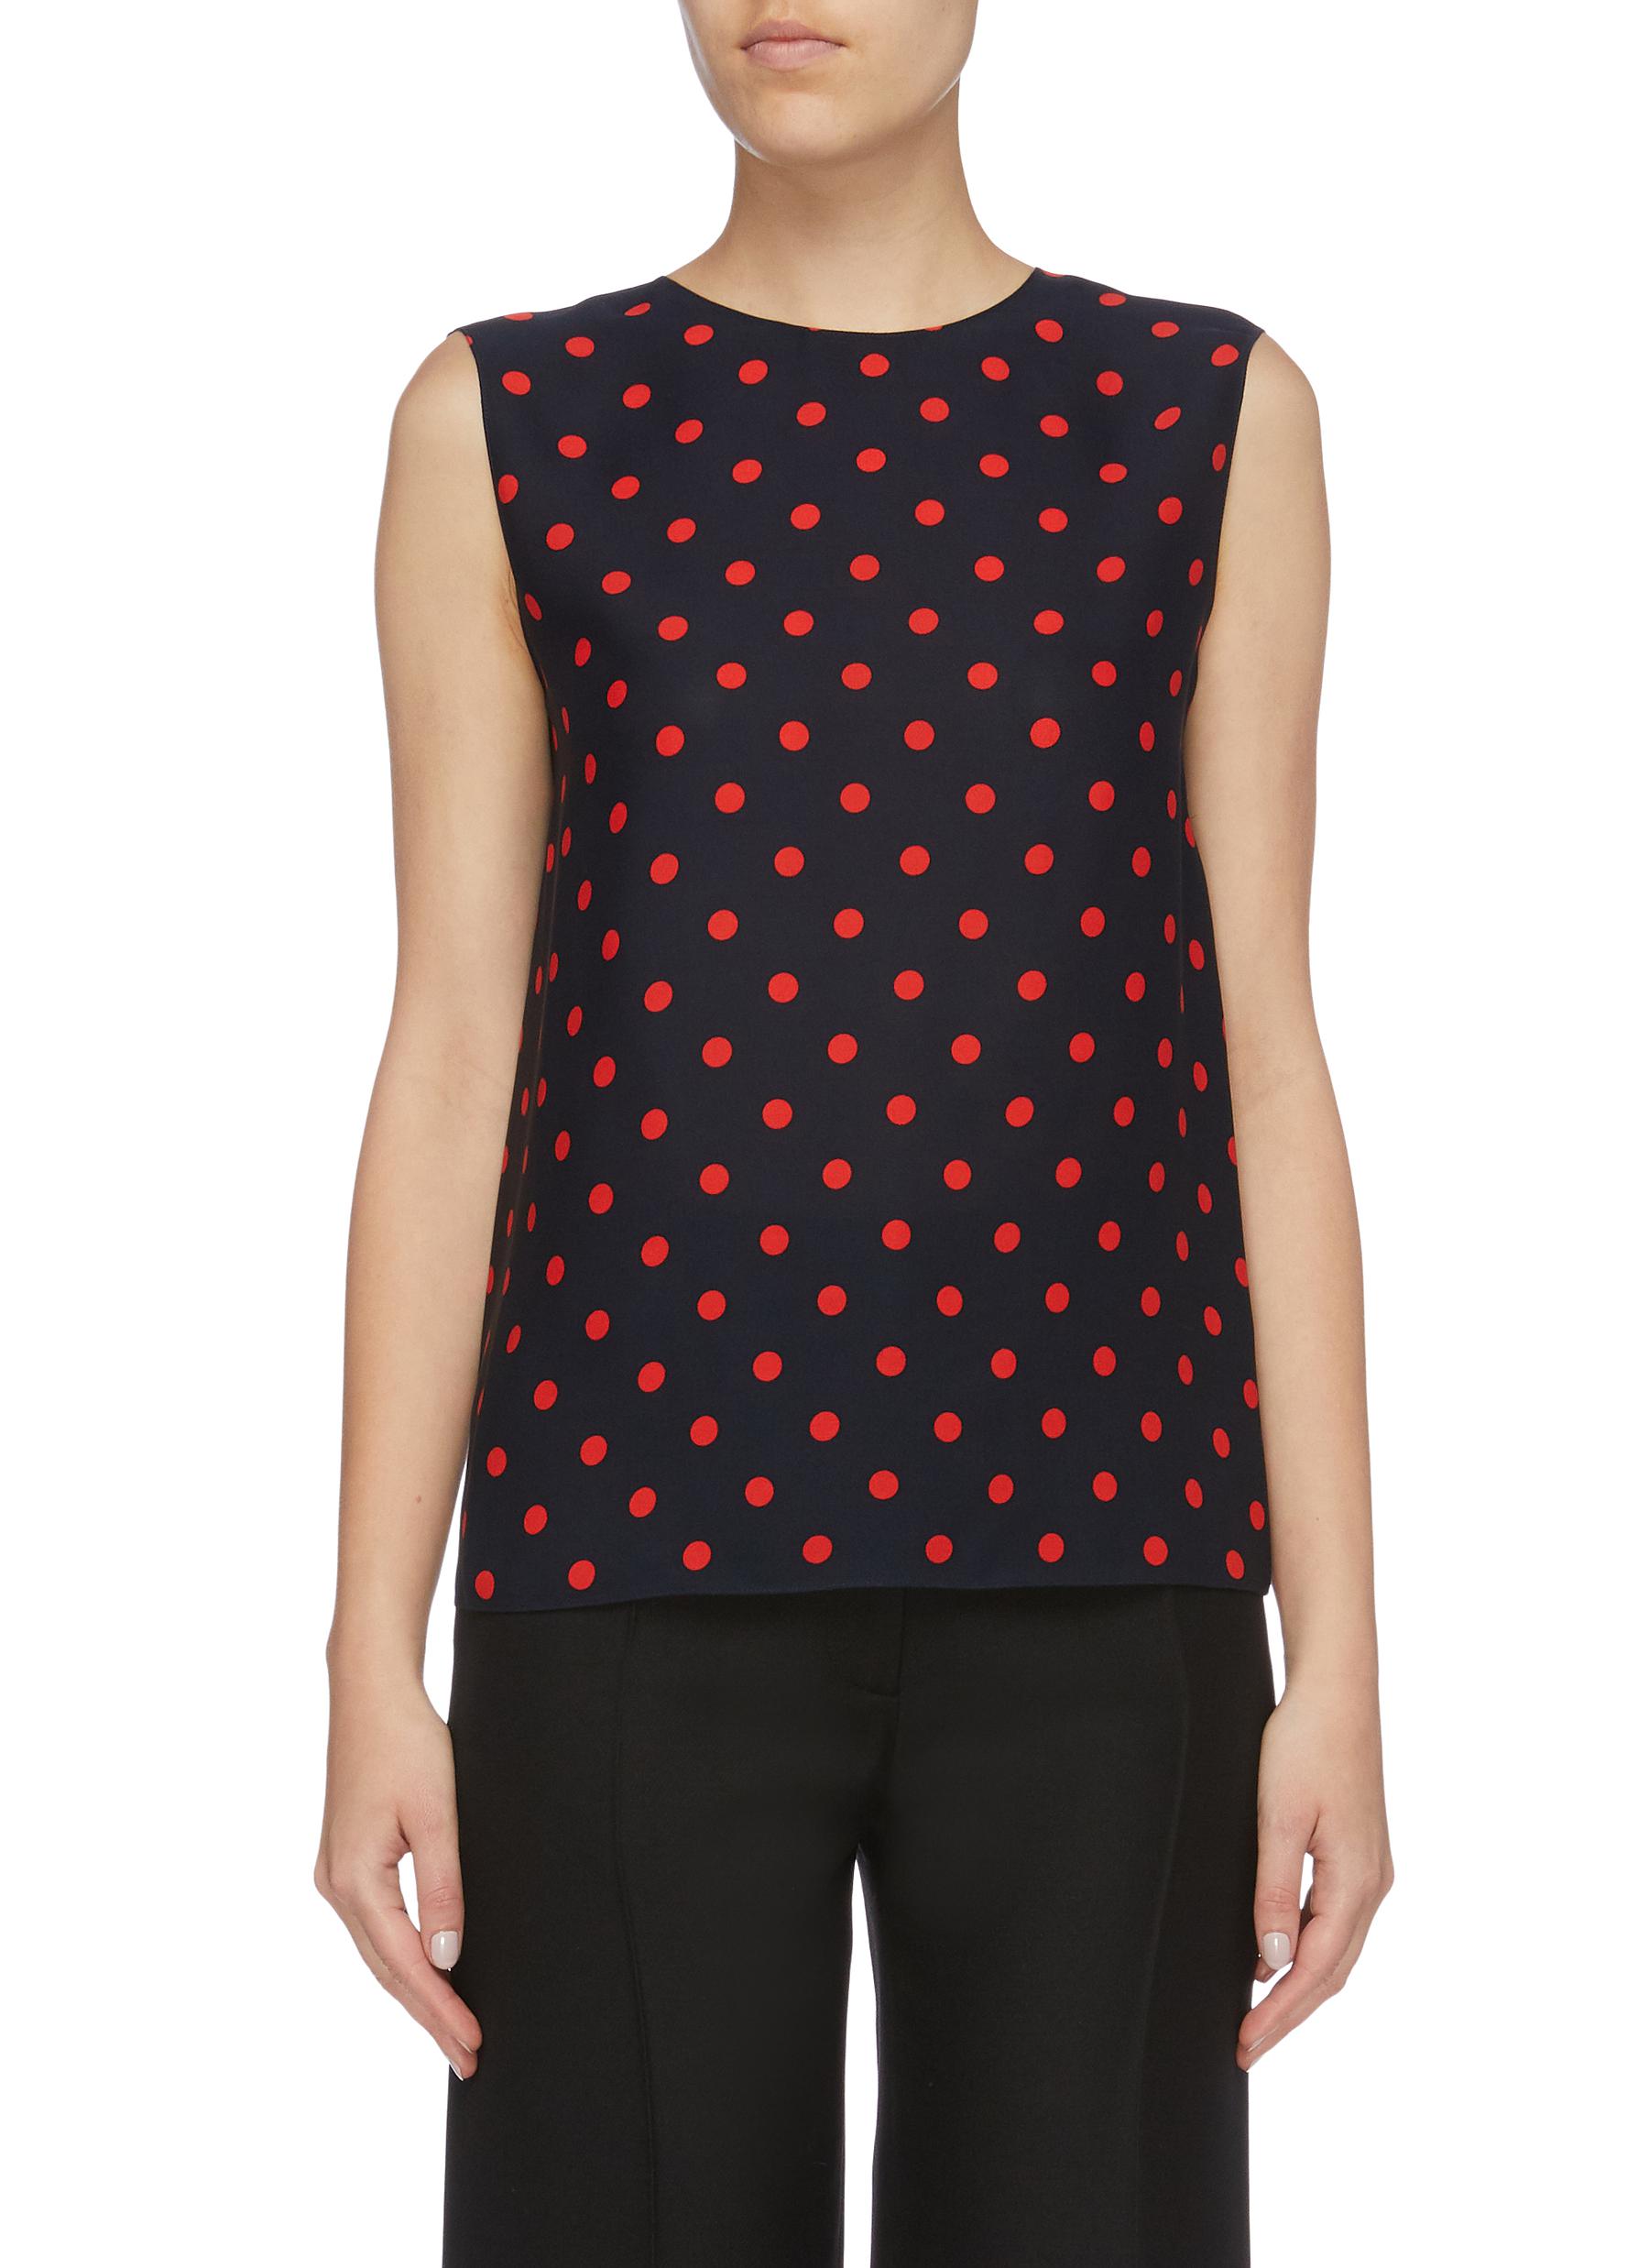 Continuous Shell polka dot silk georgette sleeveless top by Theory